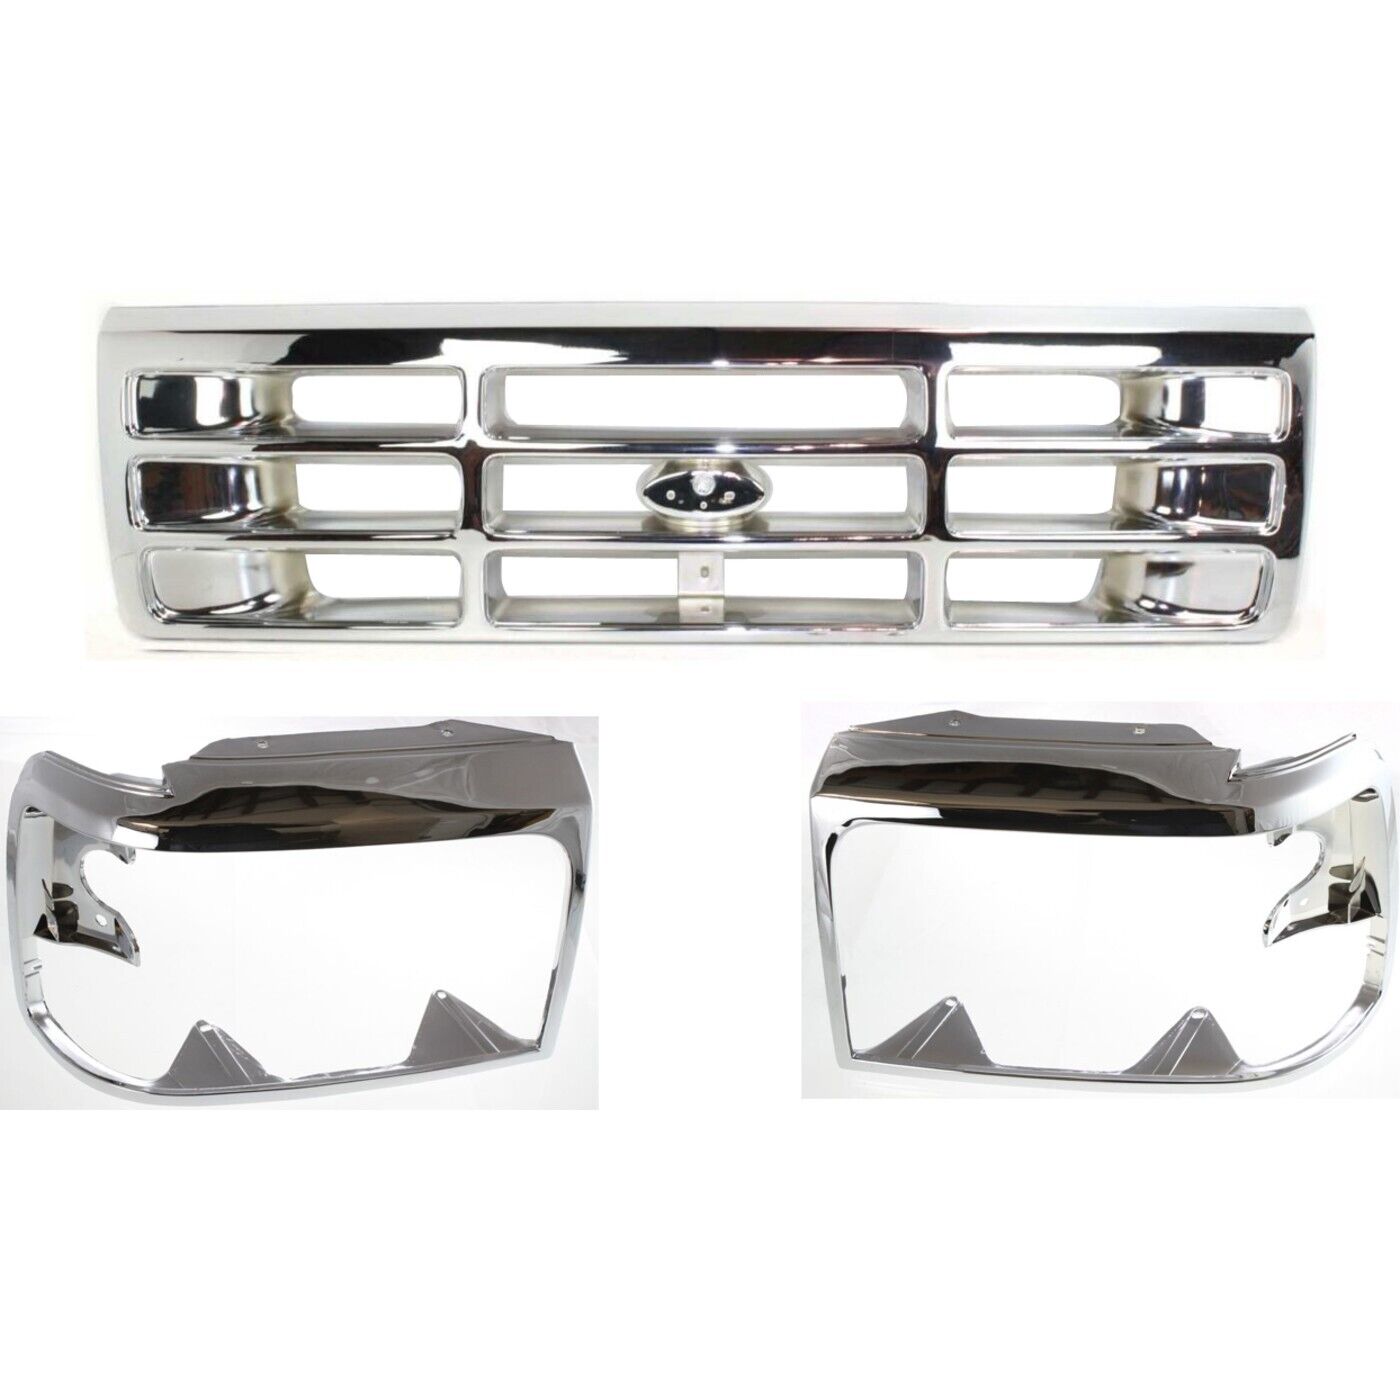 Grille Assembly Kit For 92-96 Ford F-150 F-250 Bronco 92-97 F-350 Headlight Door